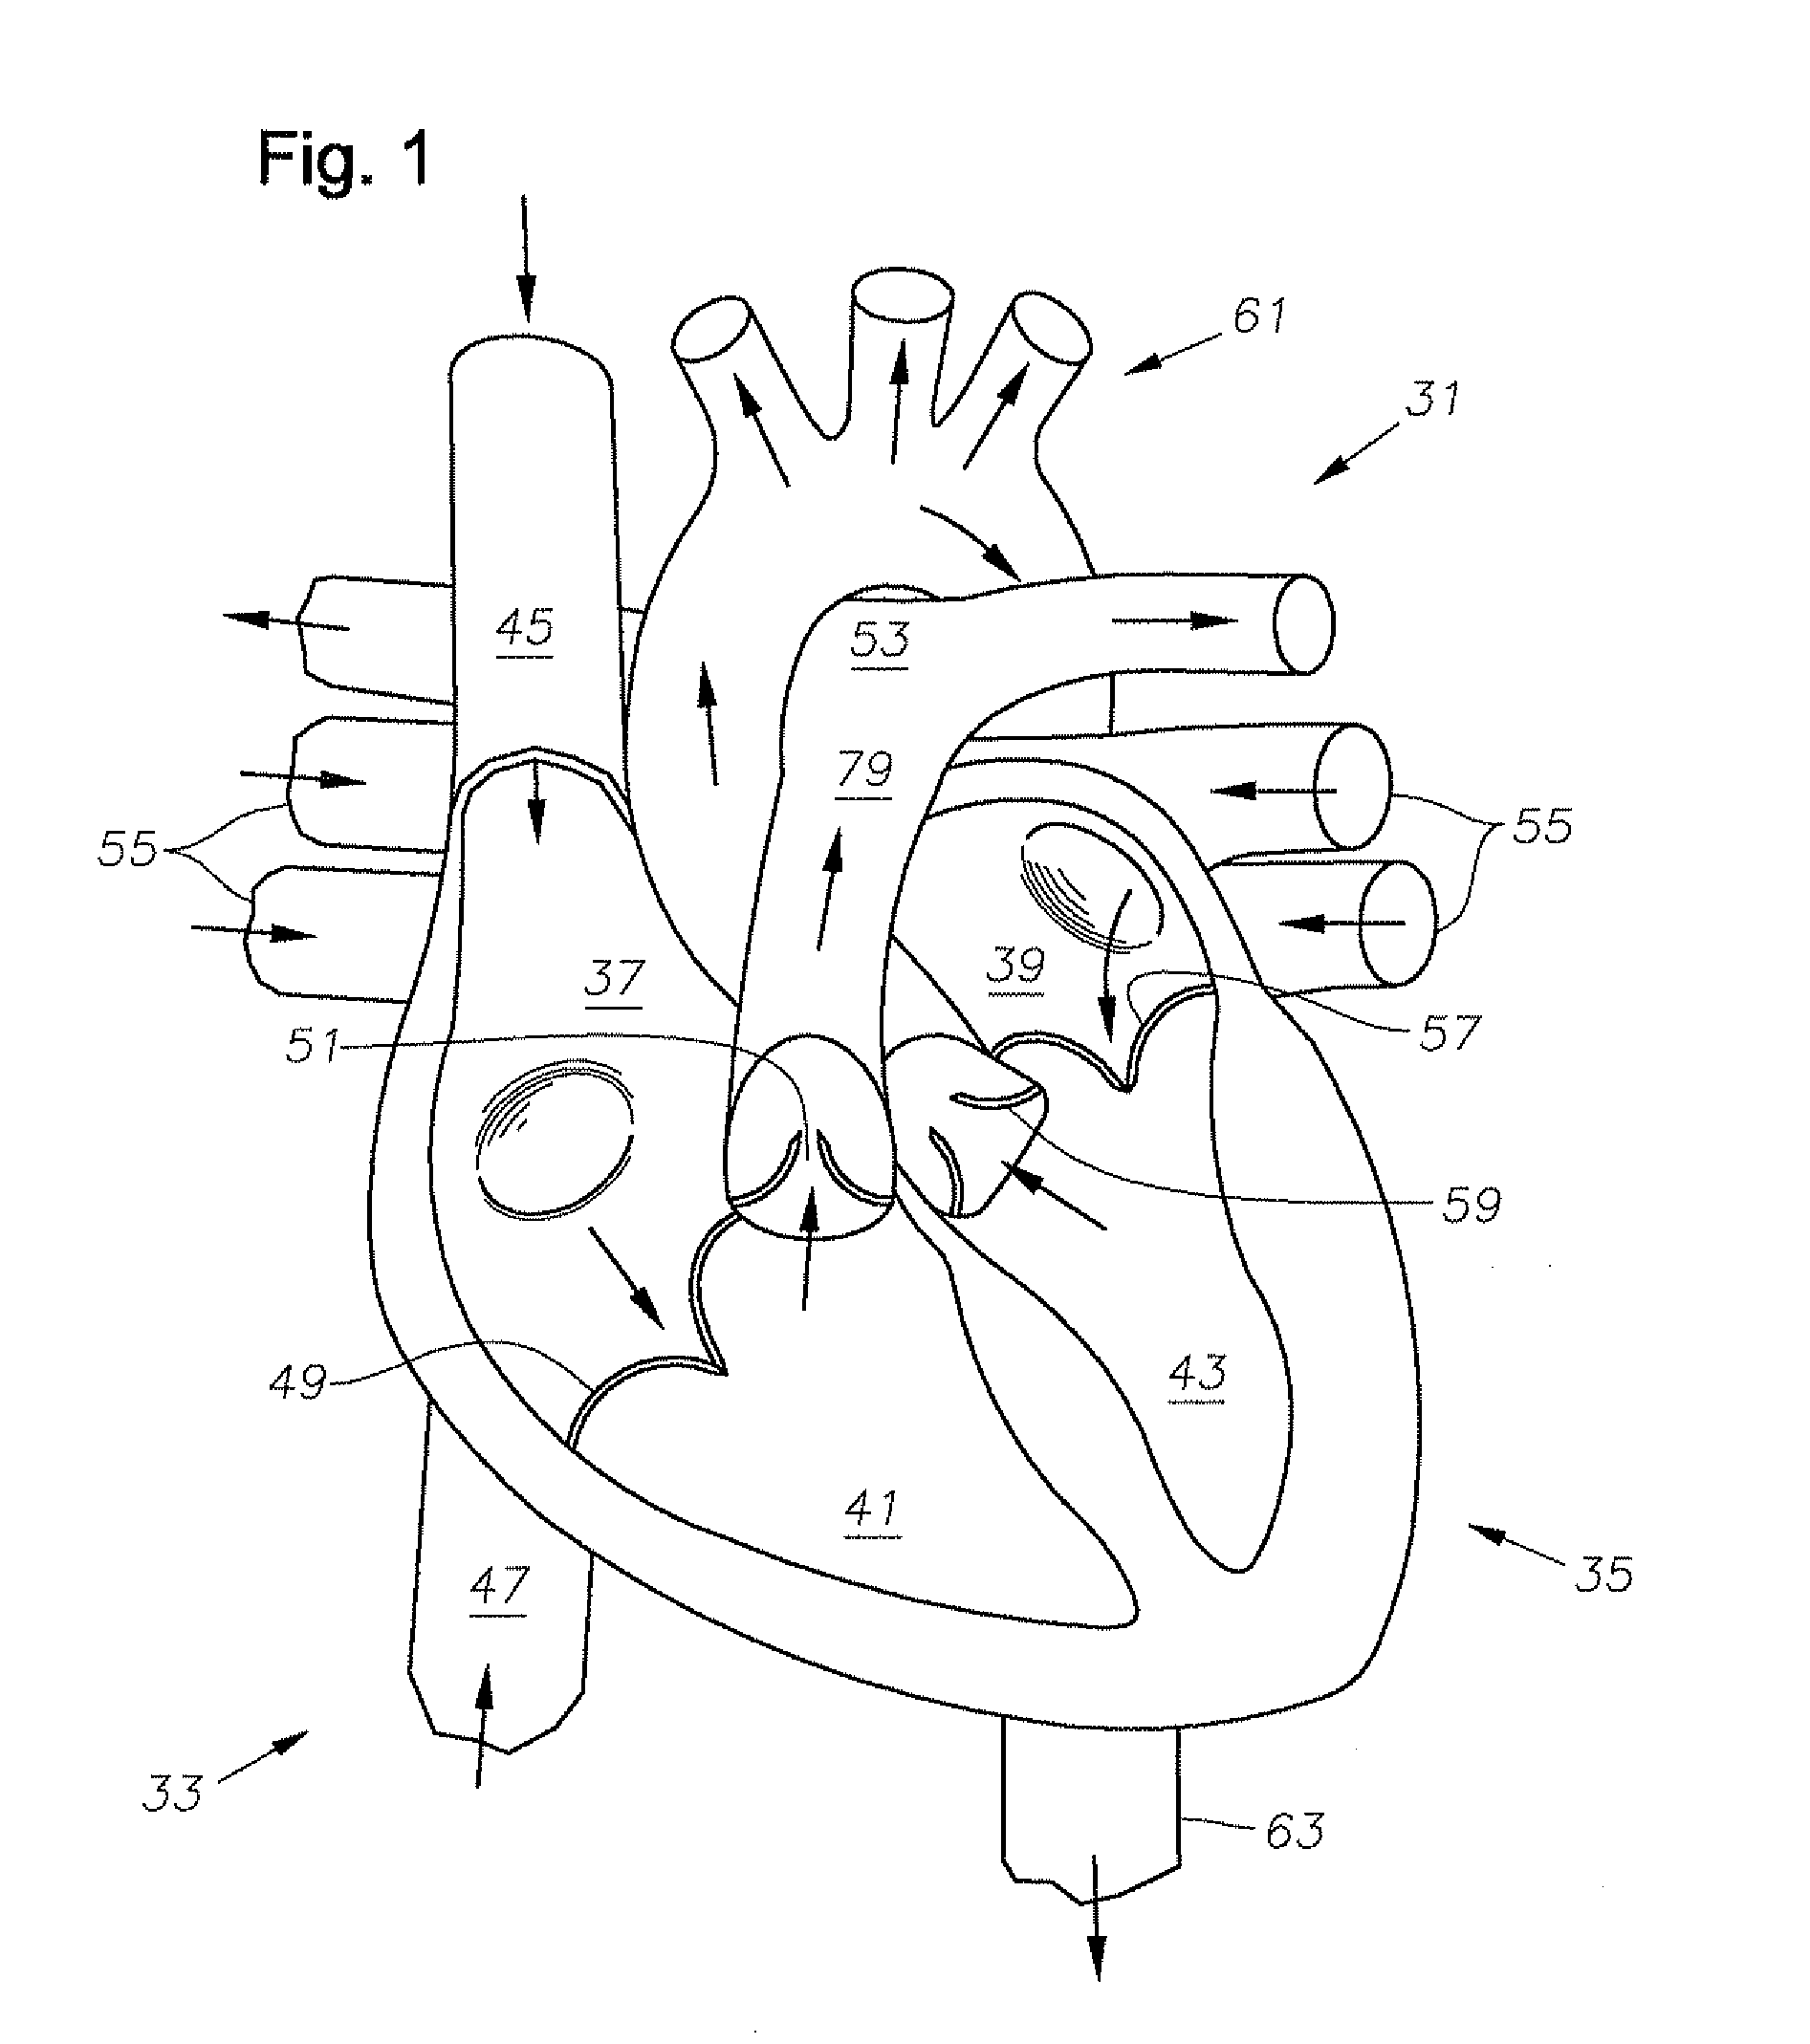 Heart pump apparatus and method for beating heart surgery